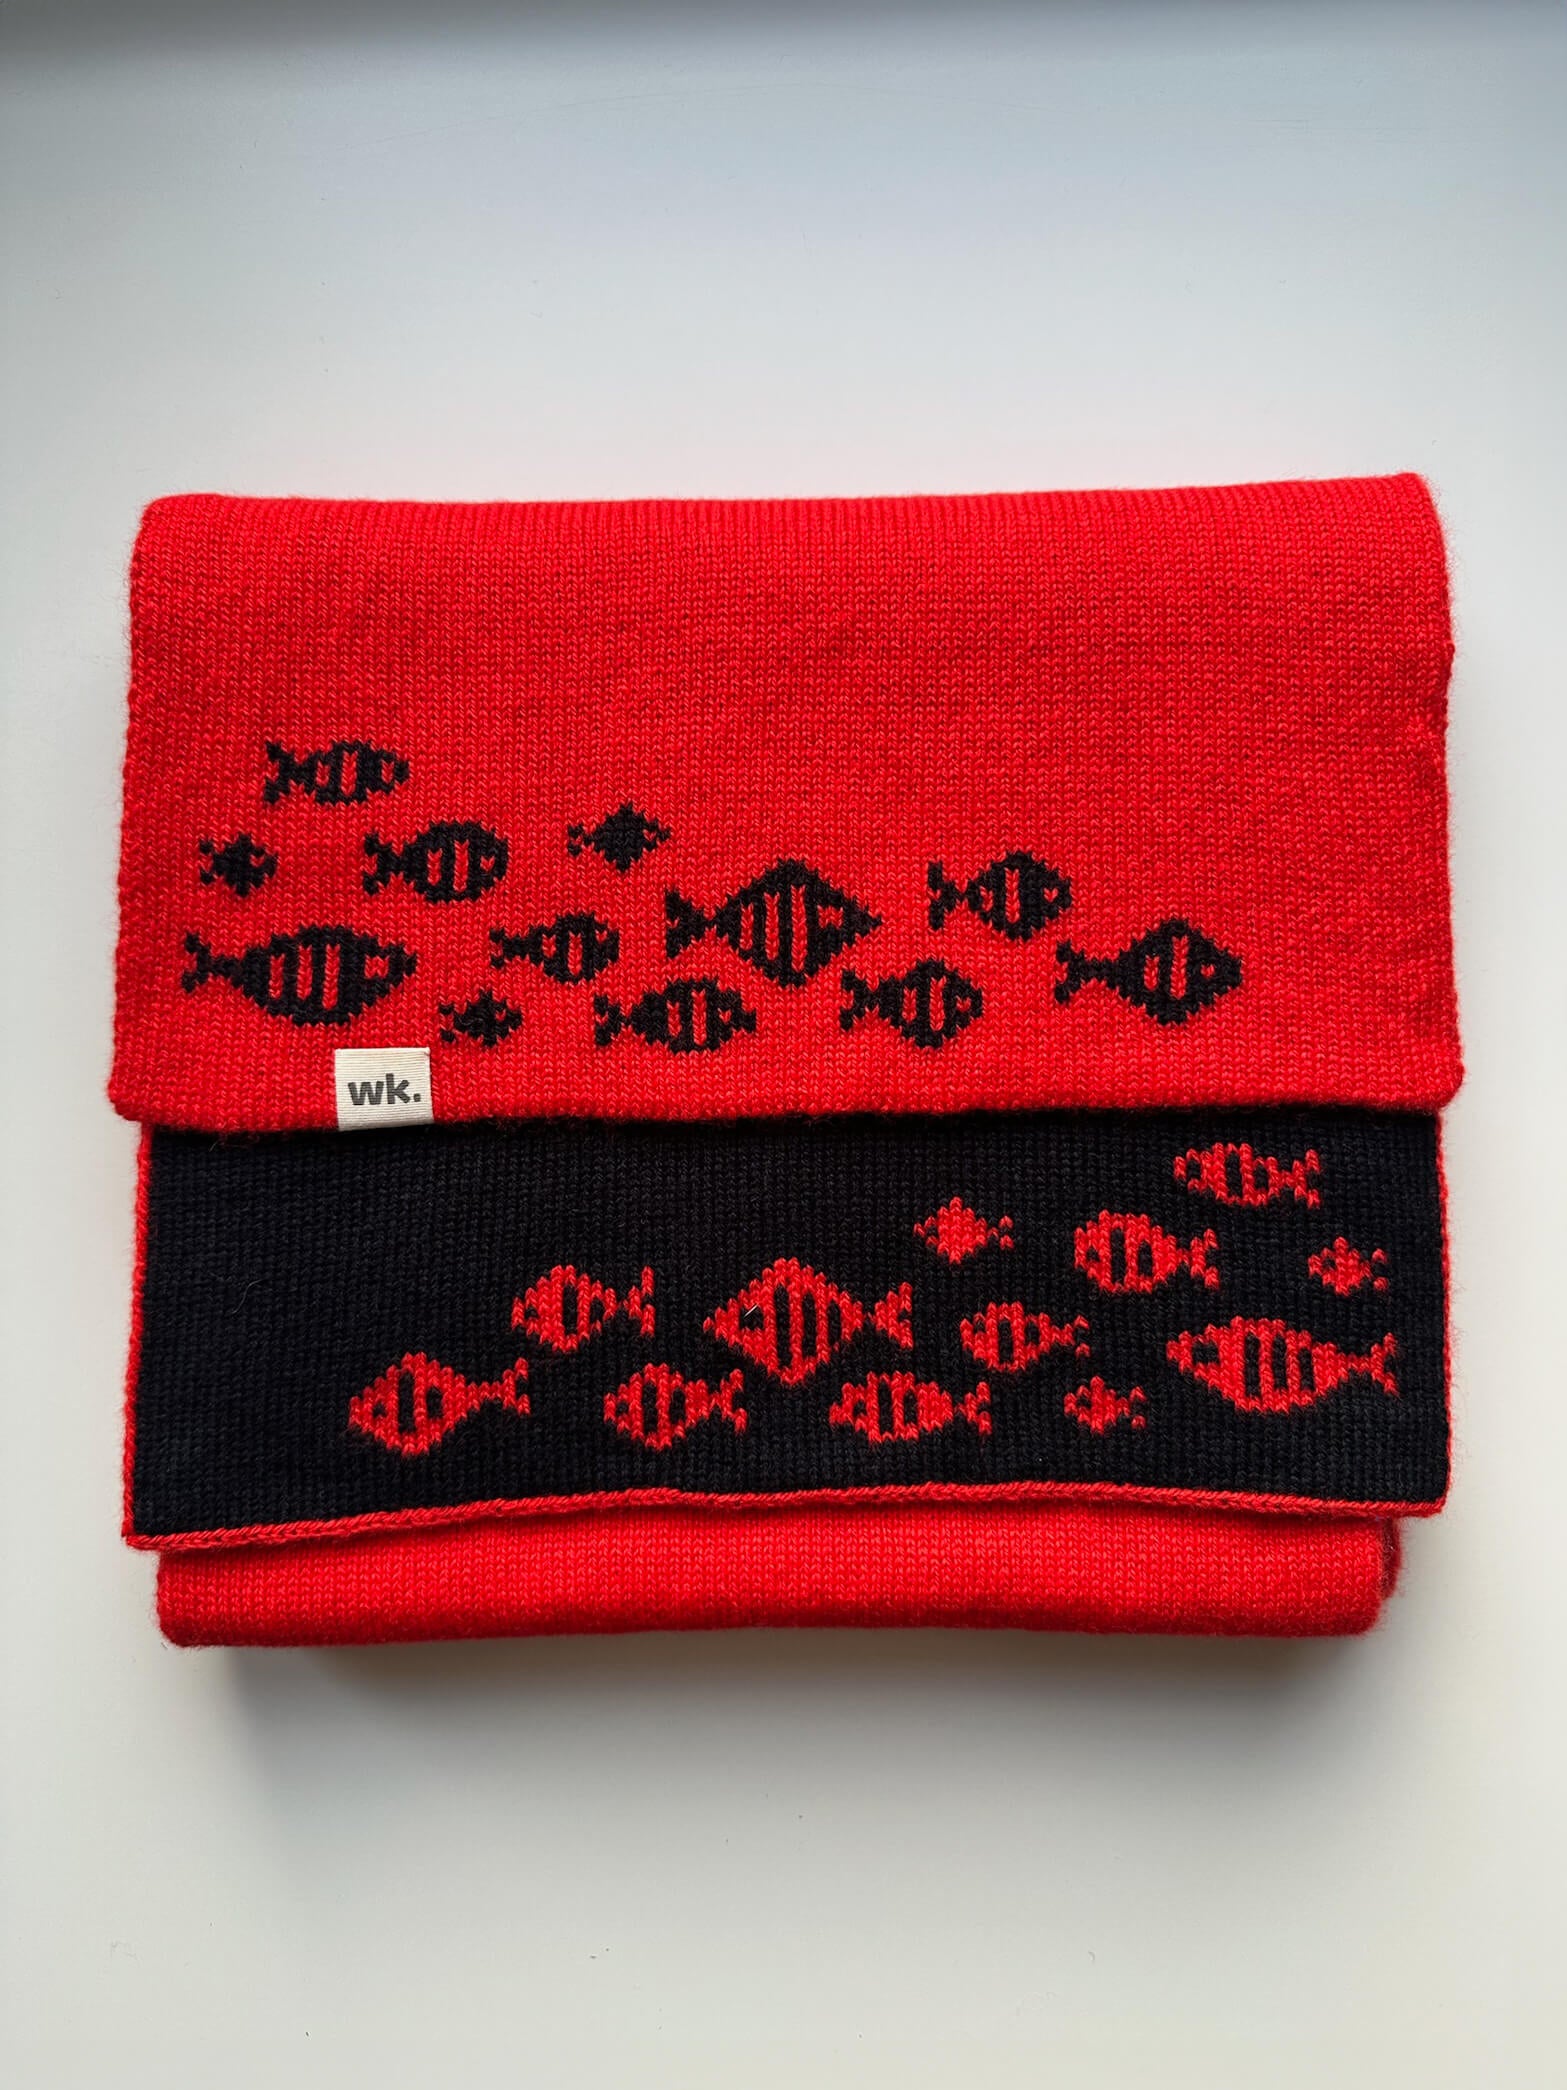 custom reversible merino wool scarf in red with dark navy fish at either end